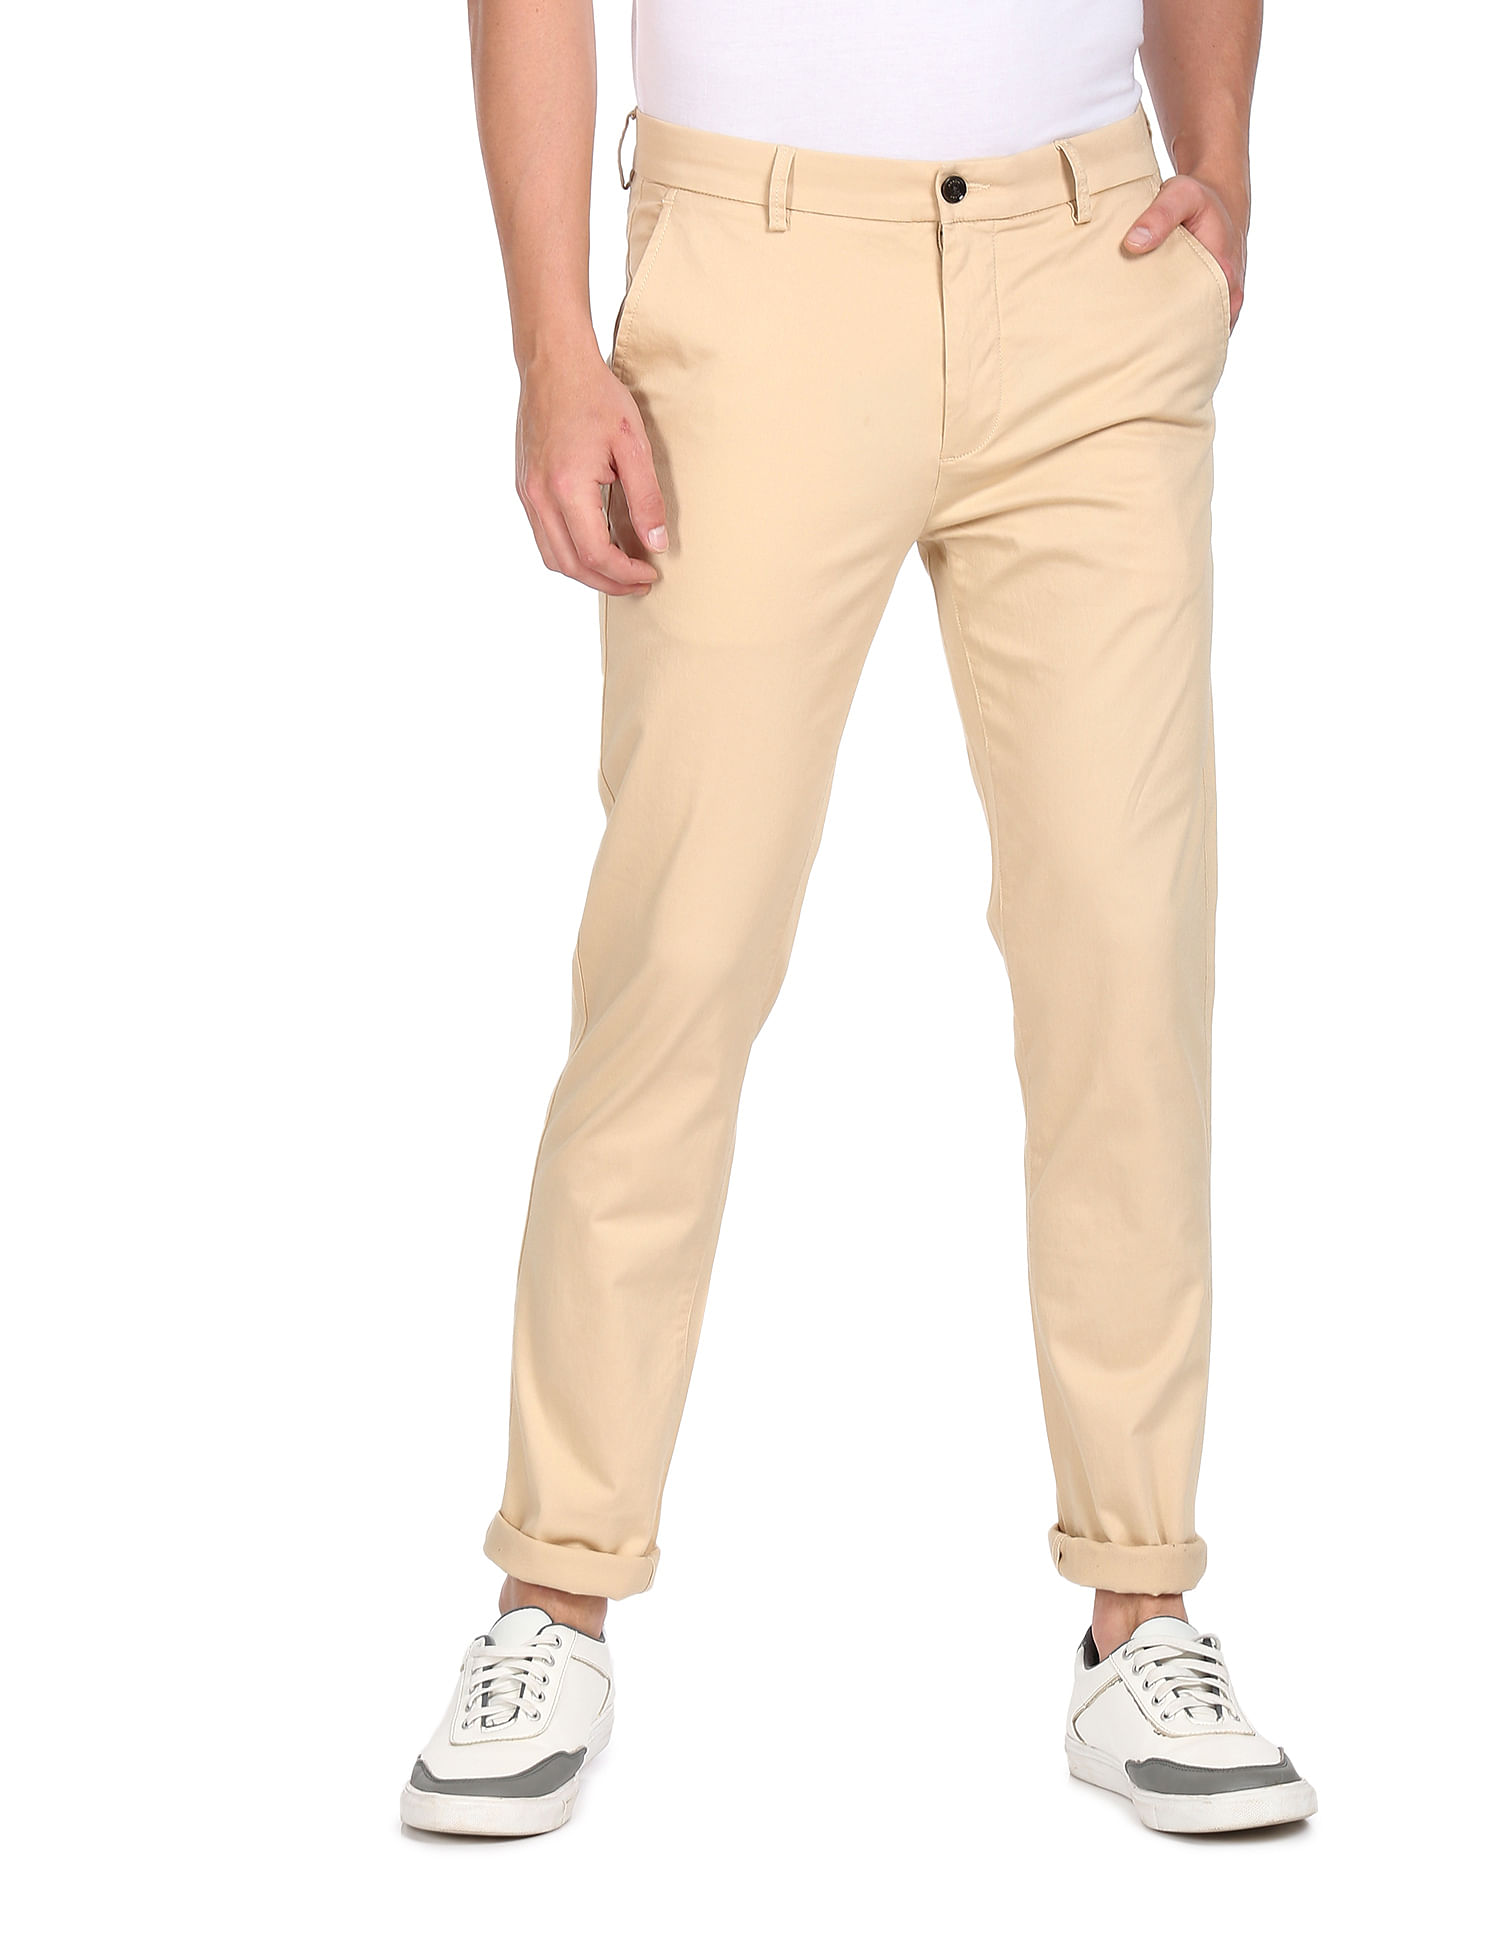 Womens Sports Trousers Buy Womens Sports Trousers Online at Low Prices  in India  Amazonin